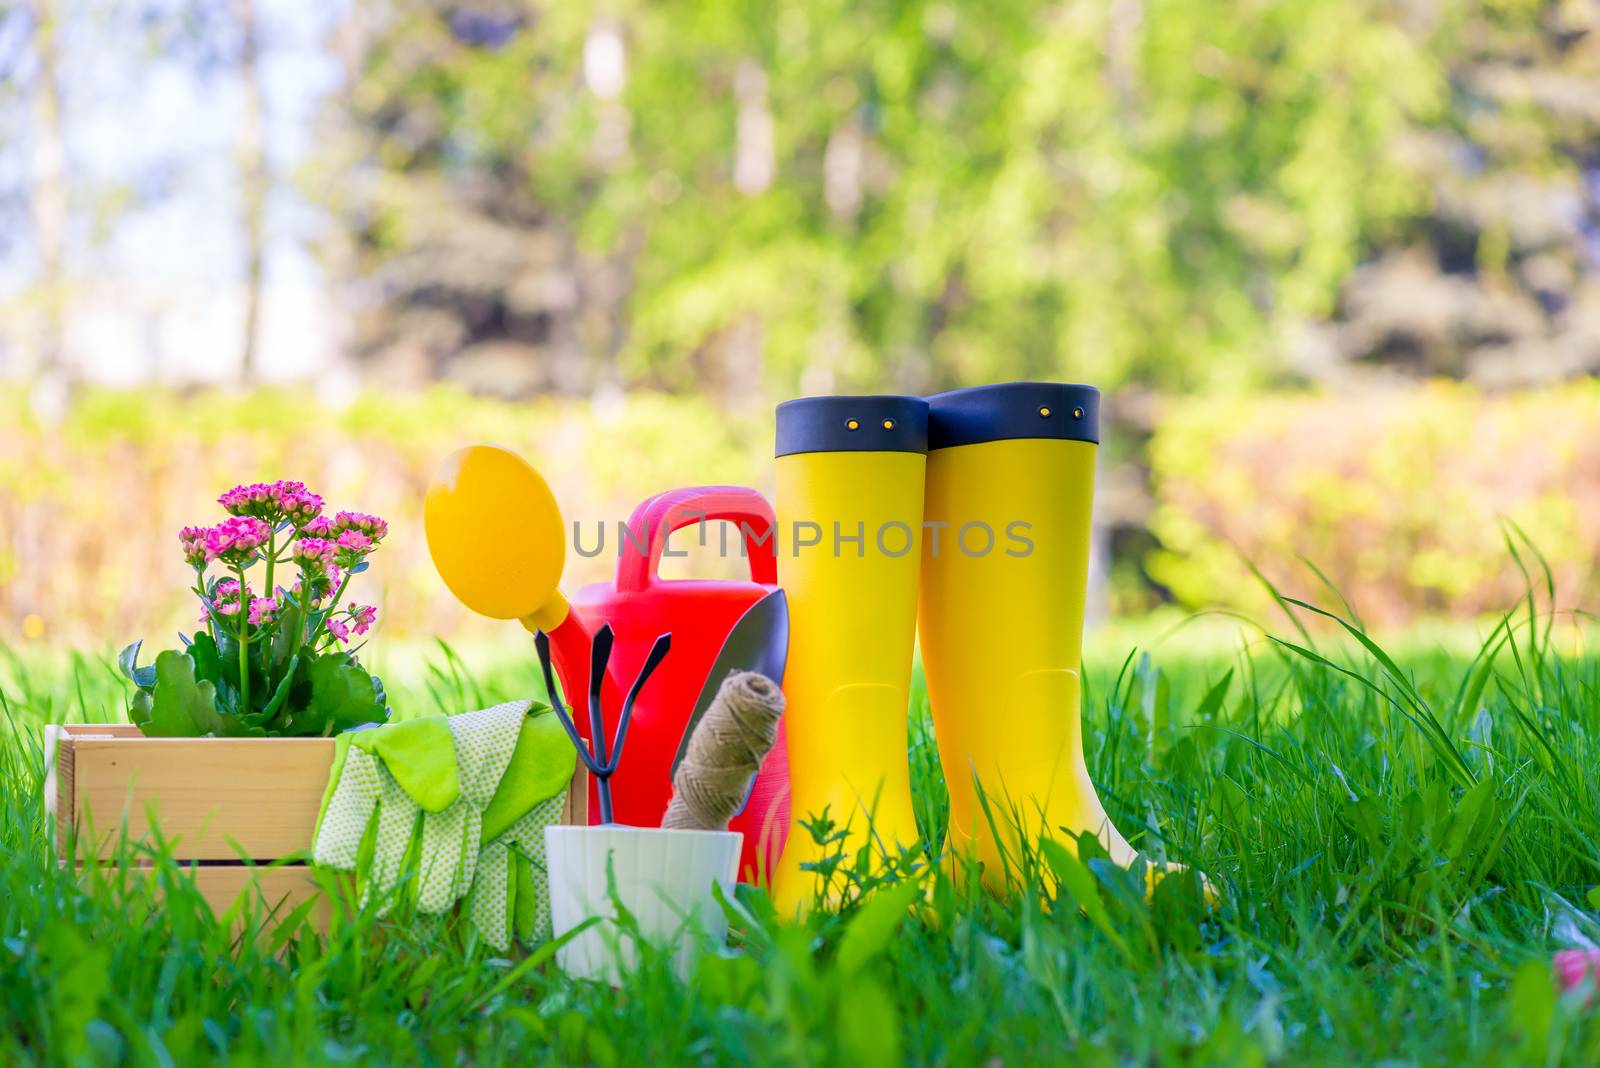 rubber boots next to the tools for working in the garden are on a green lawn in the spring